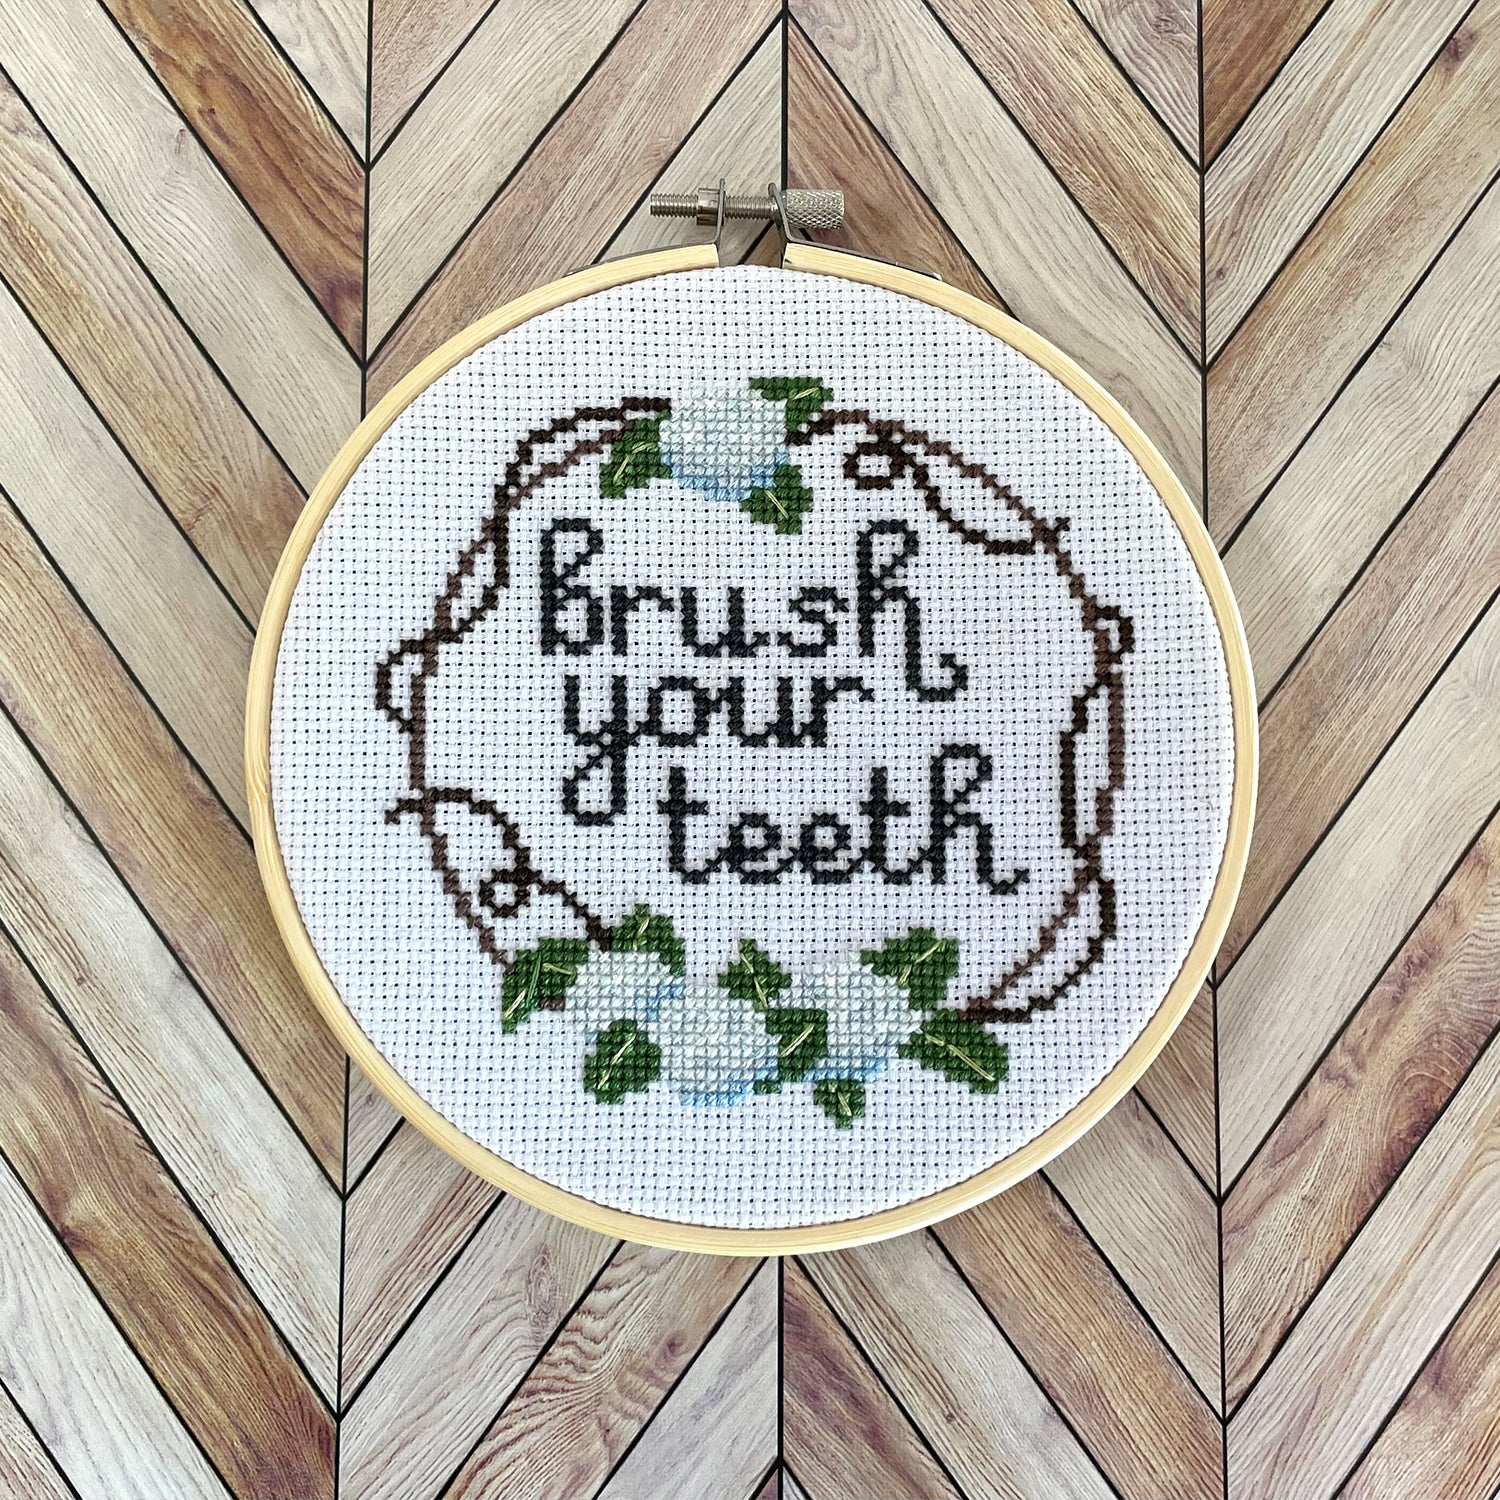 A finished cross-stitch in an embroidery hoop. The design of the cross-stitch reads "brush you teeth" and has a floral border decoration.